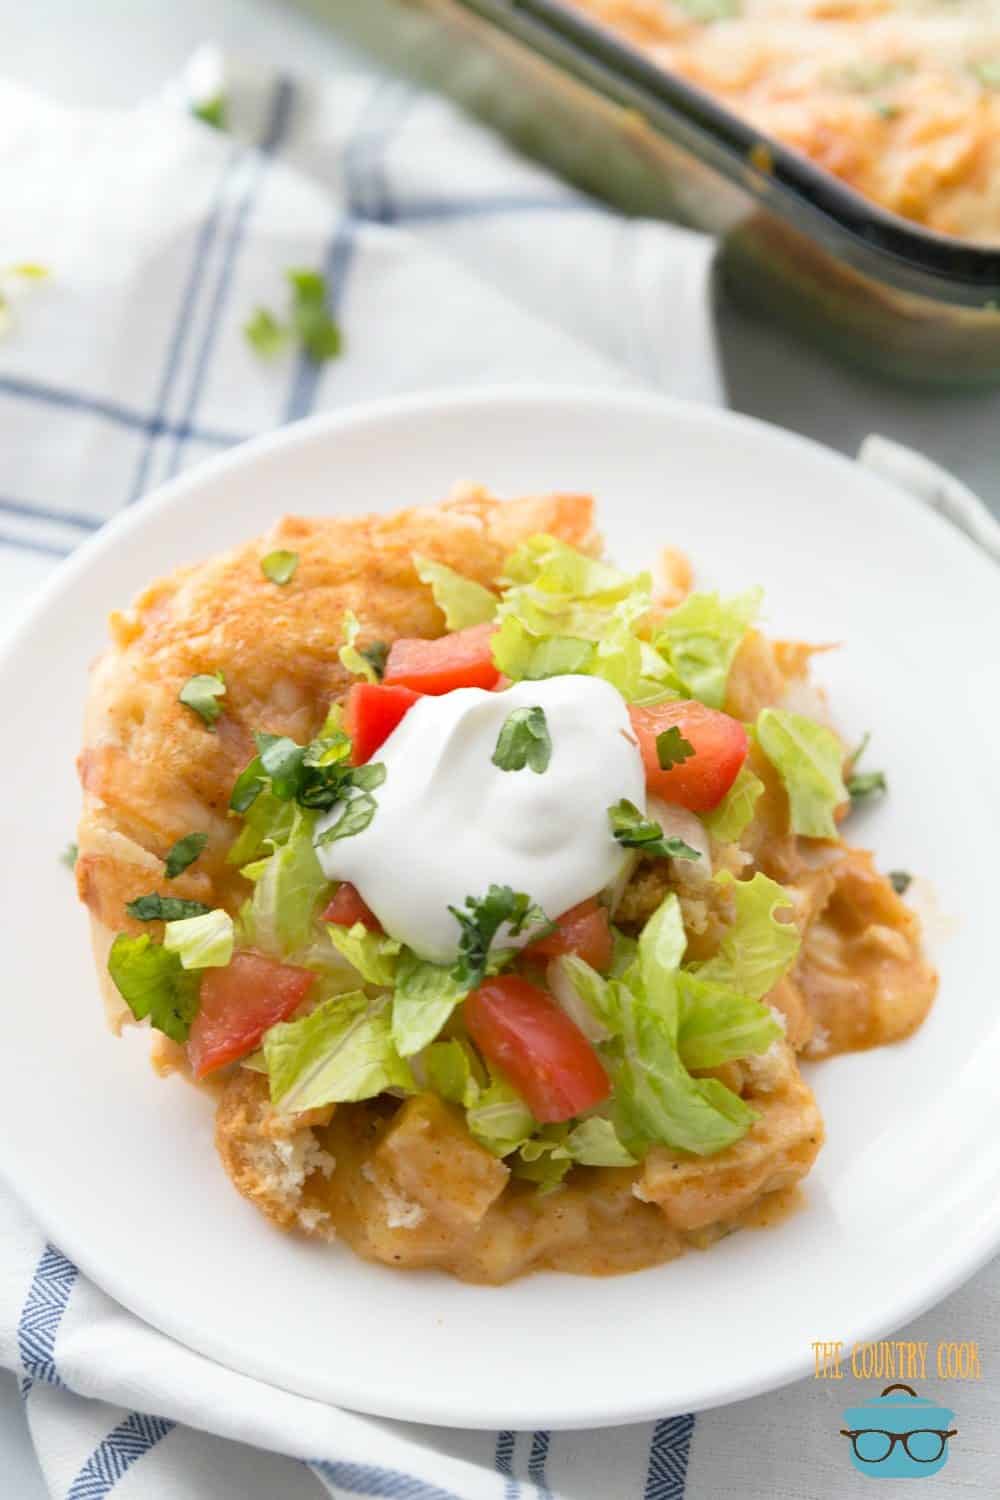 Chicken Enchilada Bake on a plate served with sour cream, lettuce and diced tomatoes.